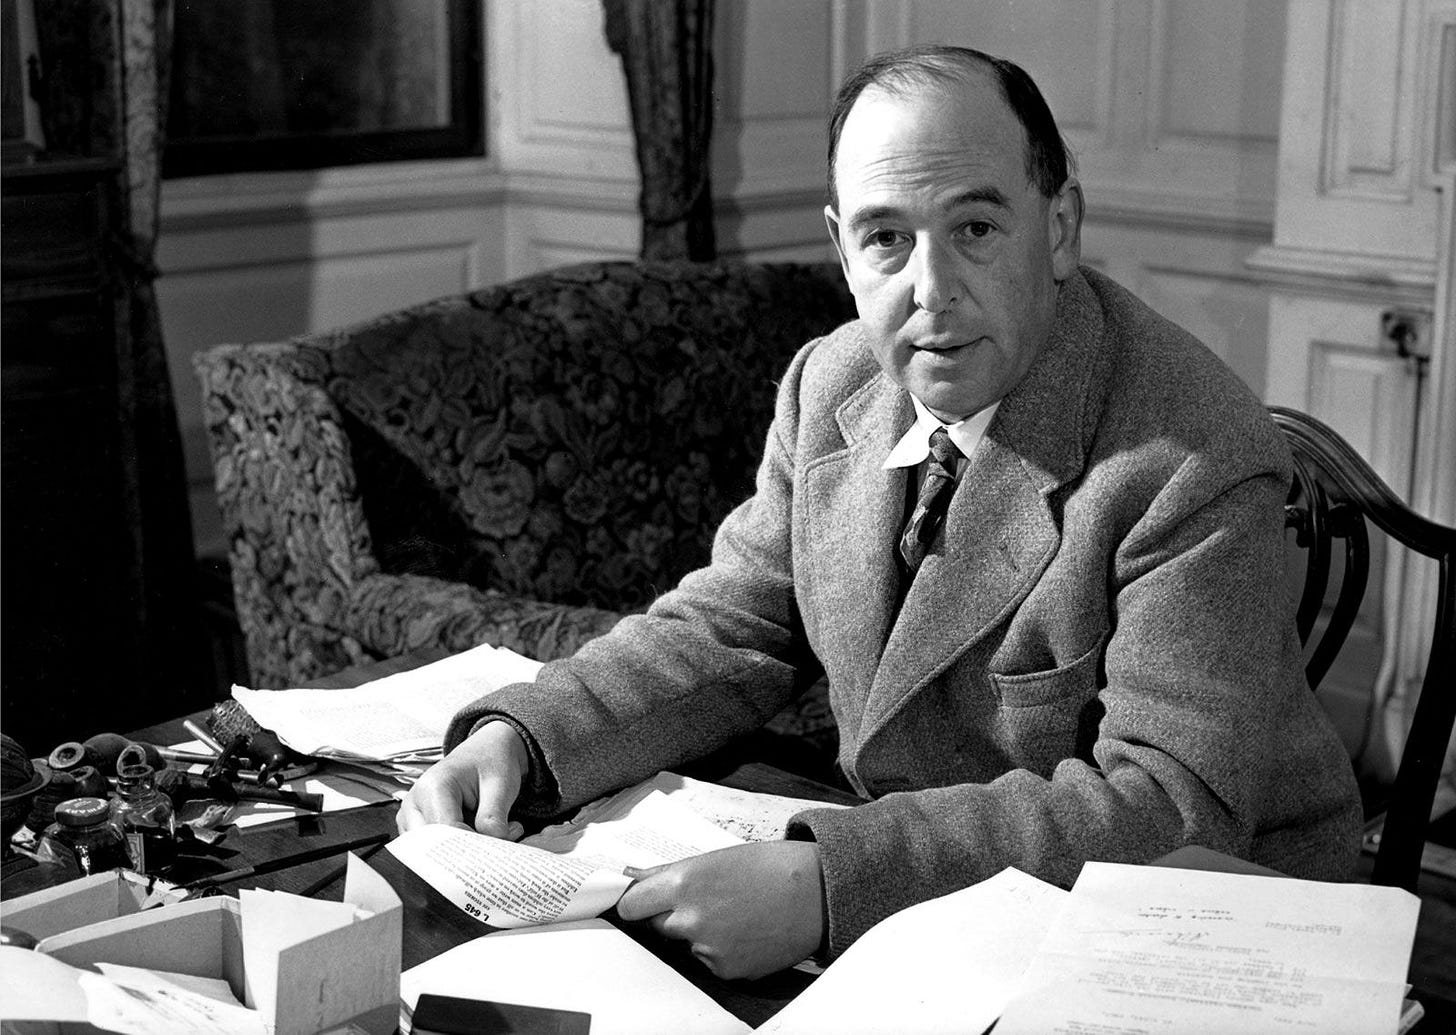 C.S. Lewis looks at the camera